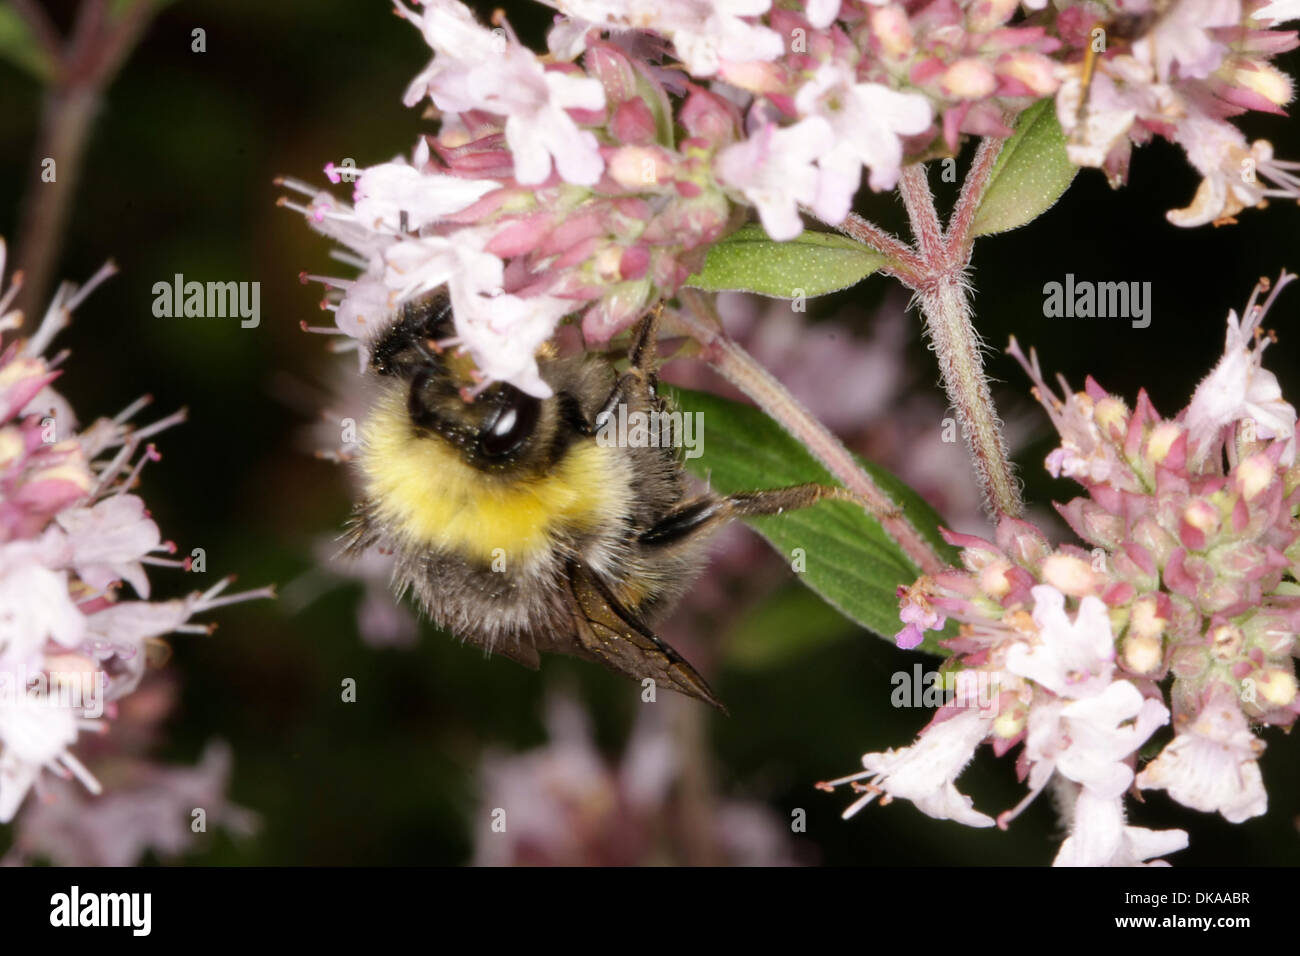 Nectar collecting bumble bee on oregano flowers. The oregano is an agreeable aromatically smelling plant, whose ethereal oils are used for medicines. It also finds very application in the herb-kitchen. Photo: Klaus Nowottnick Date: August 1, 2013 Stock Photo